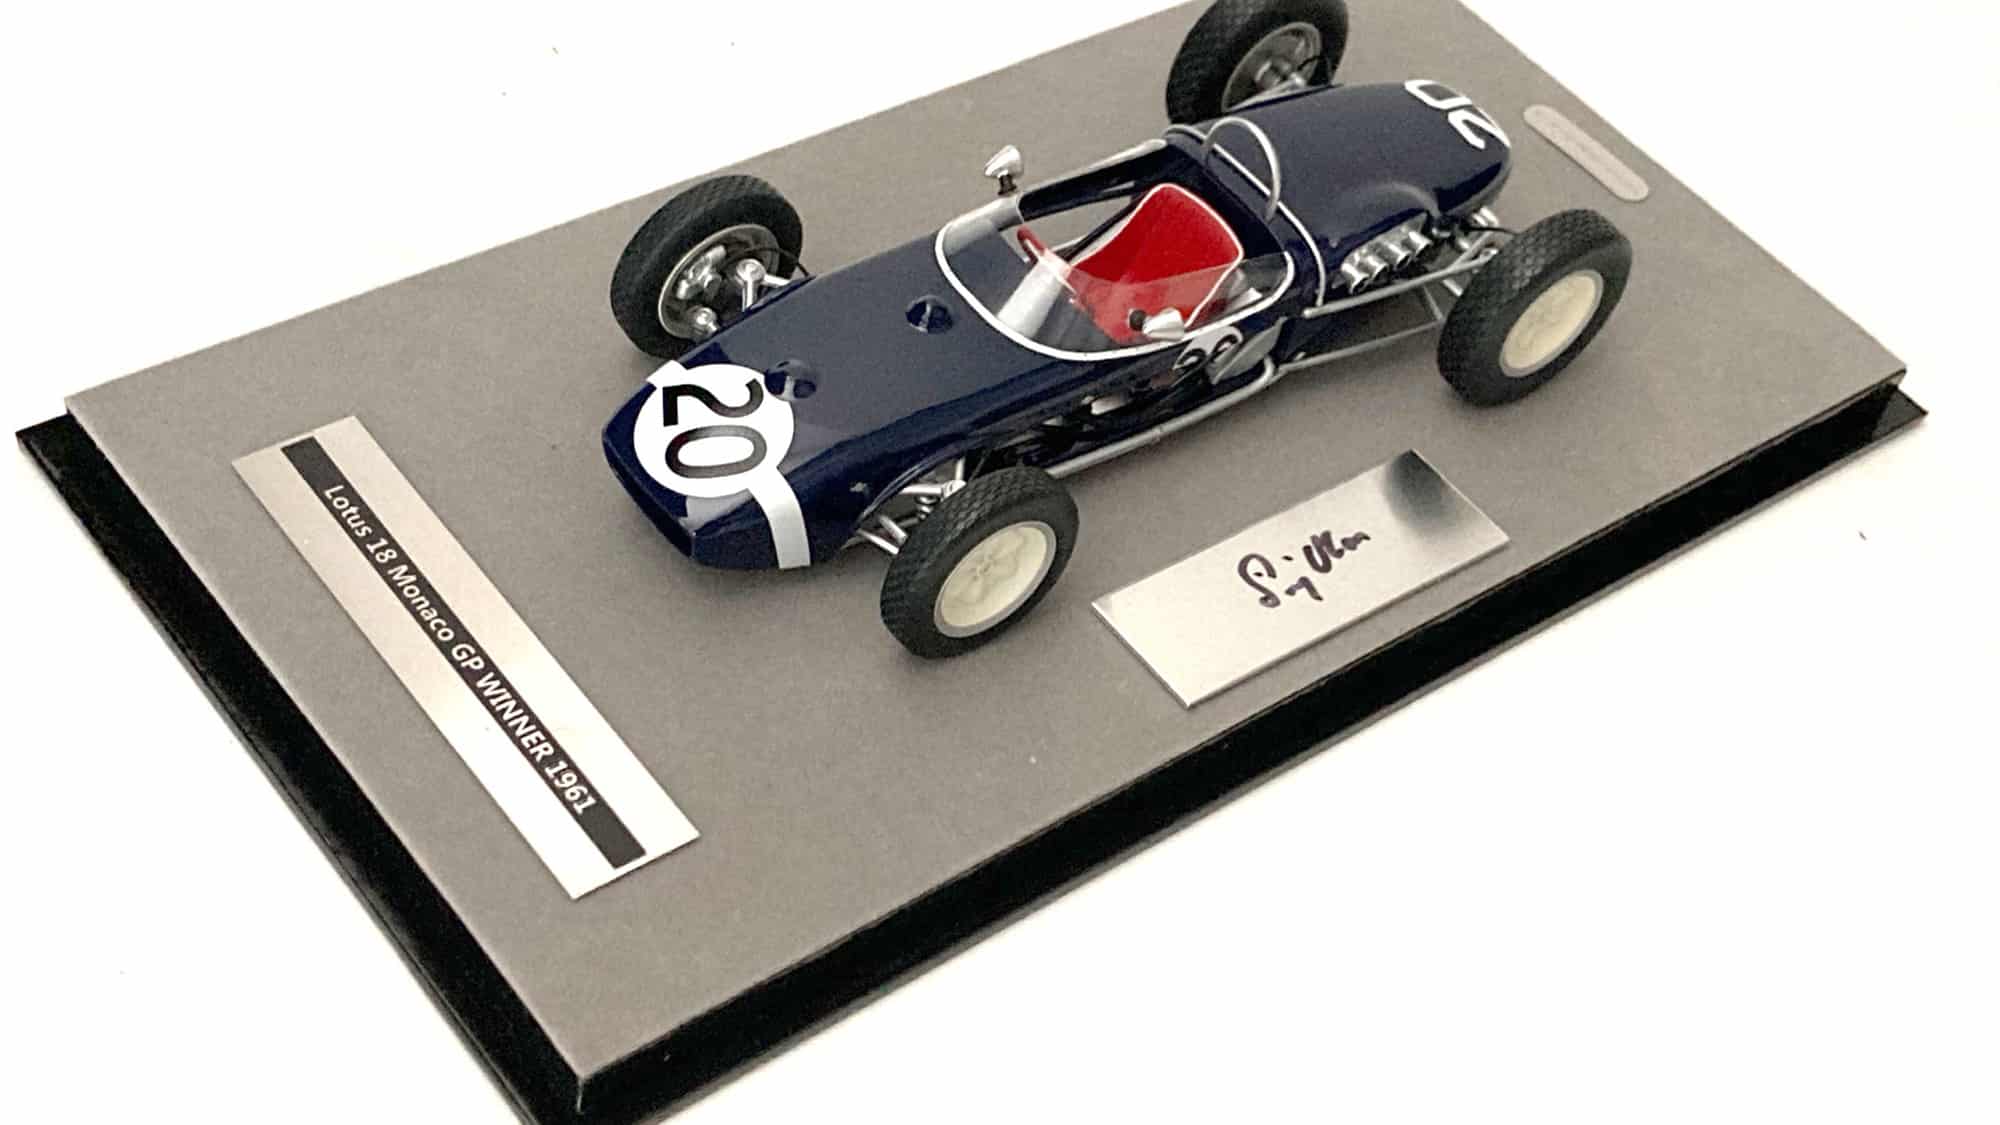 Share more than 87 formula 1 related gifts